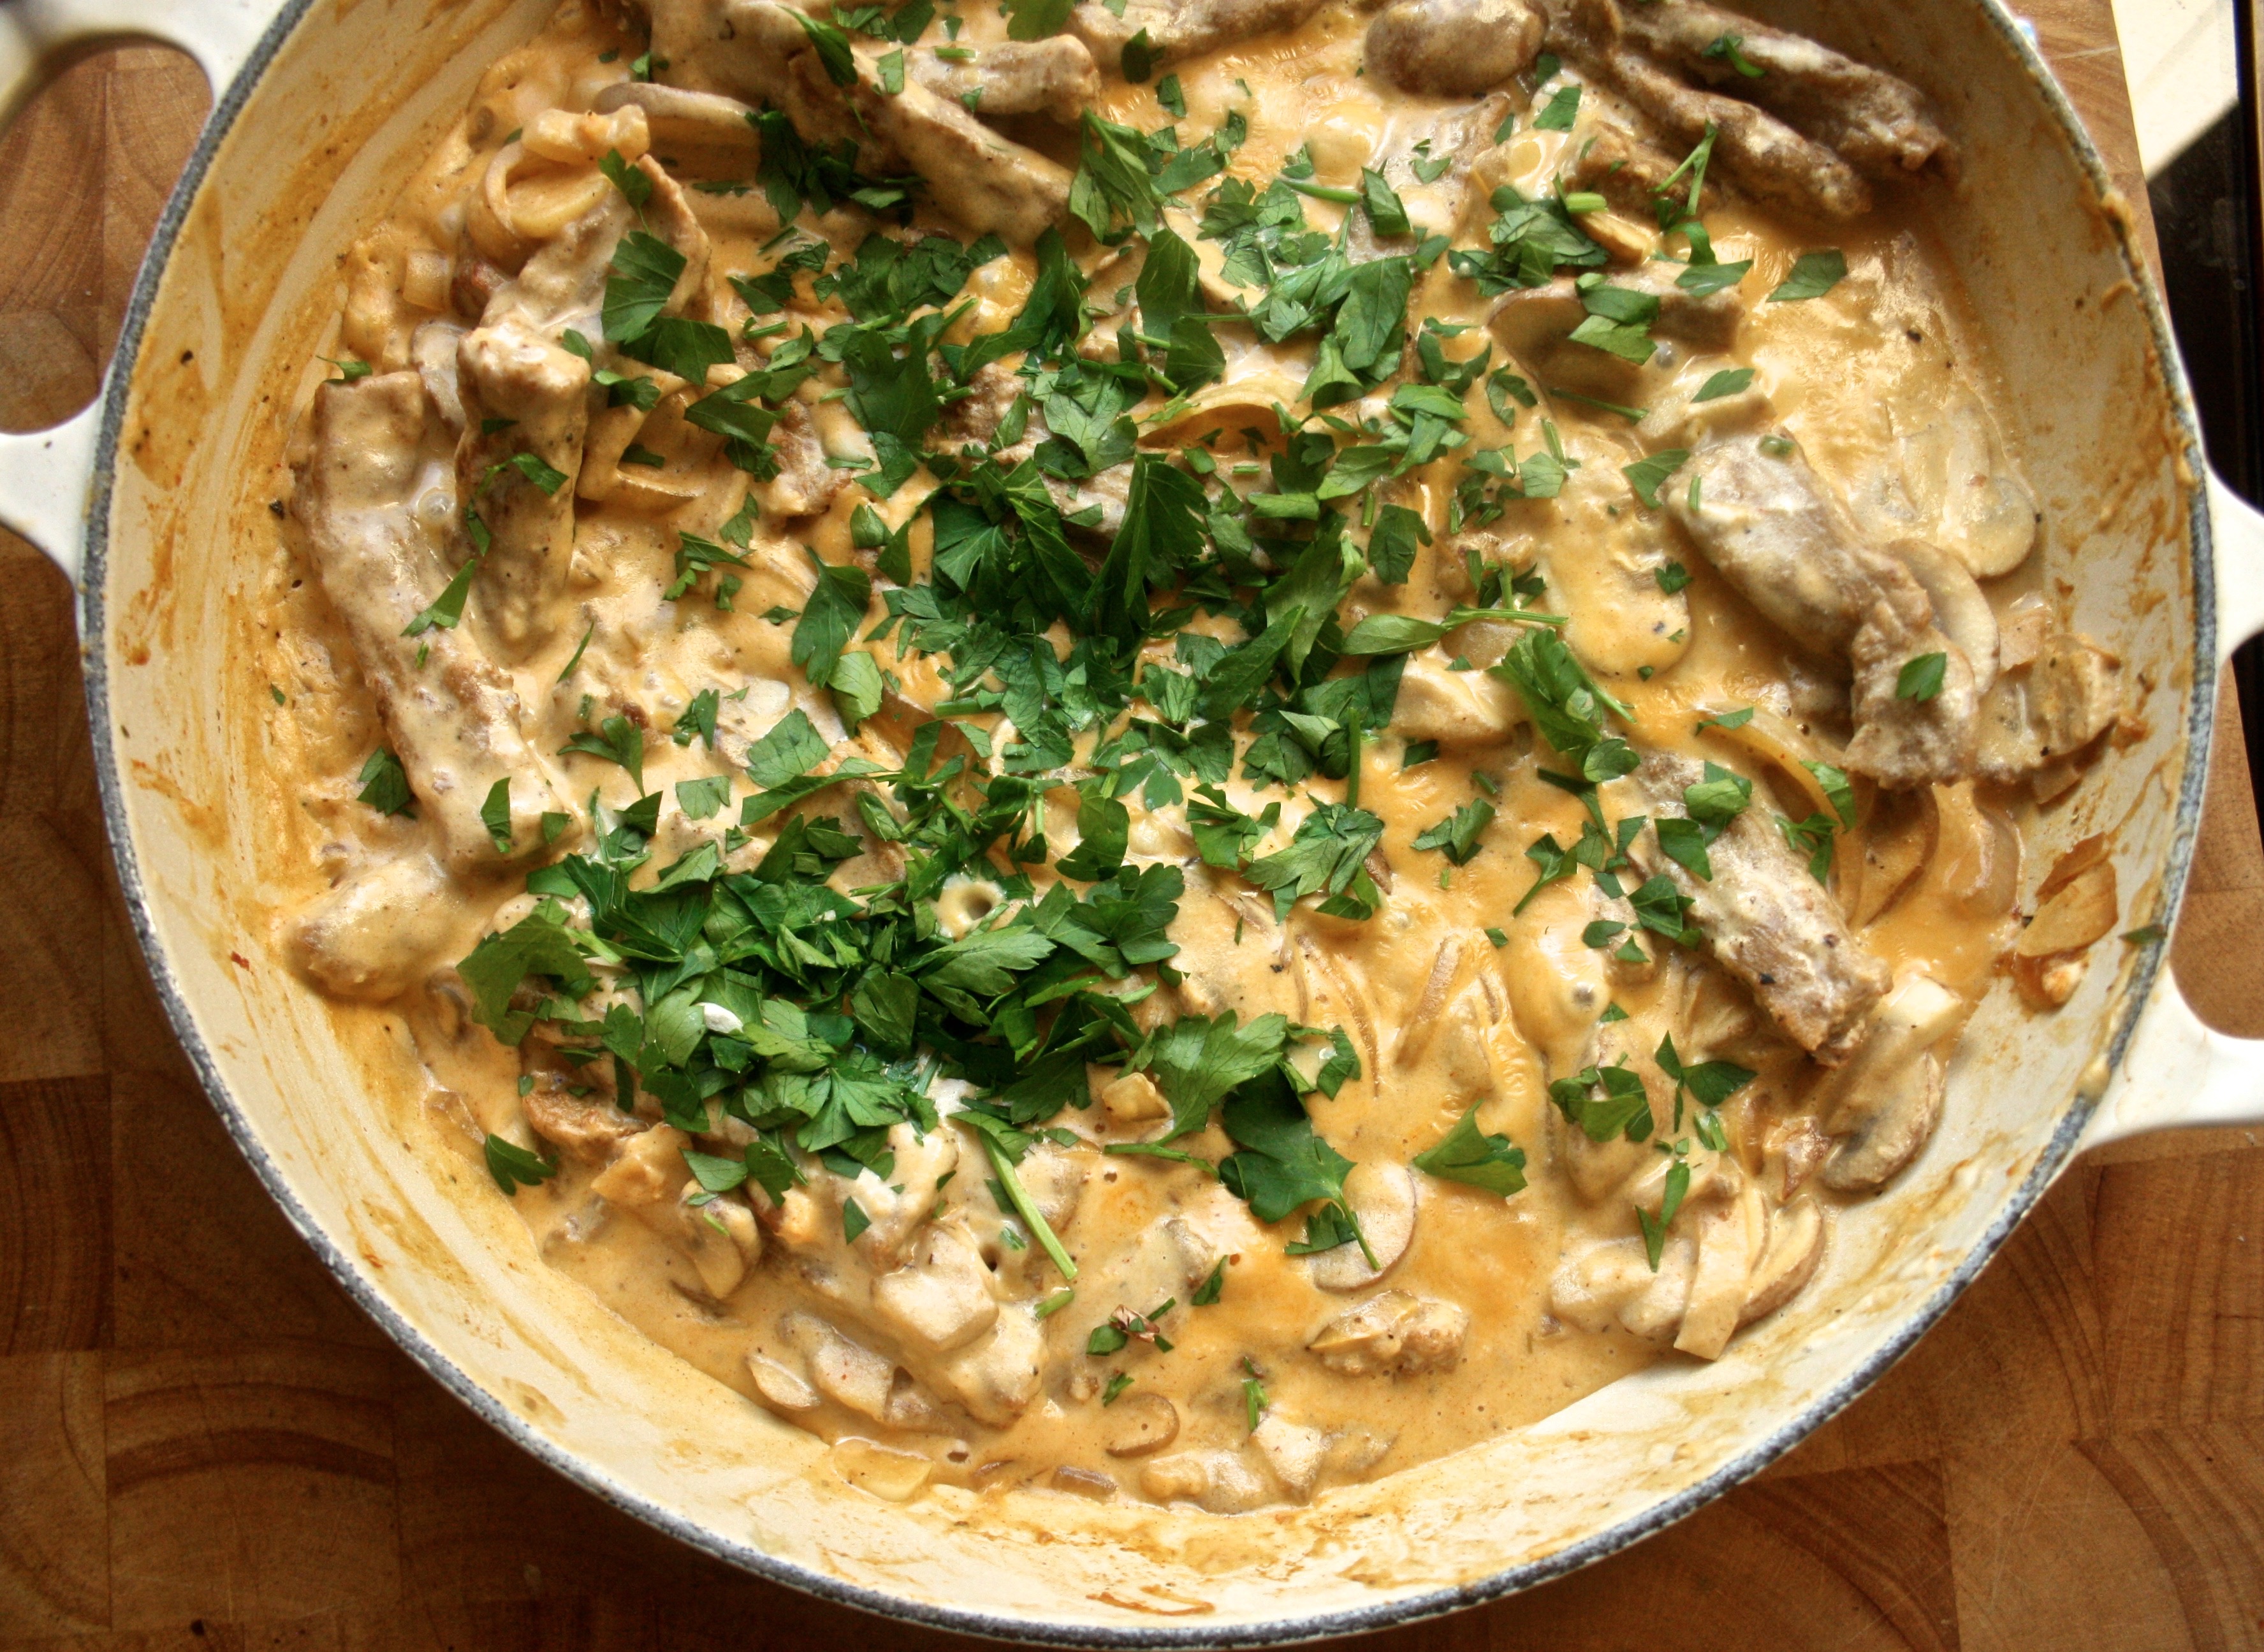 A casserole dish with cooked vegan stroganoff inside topped with chopped parsley